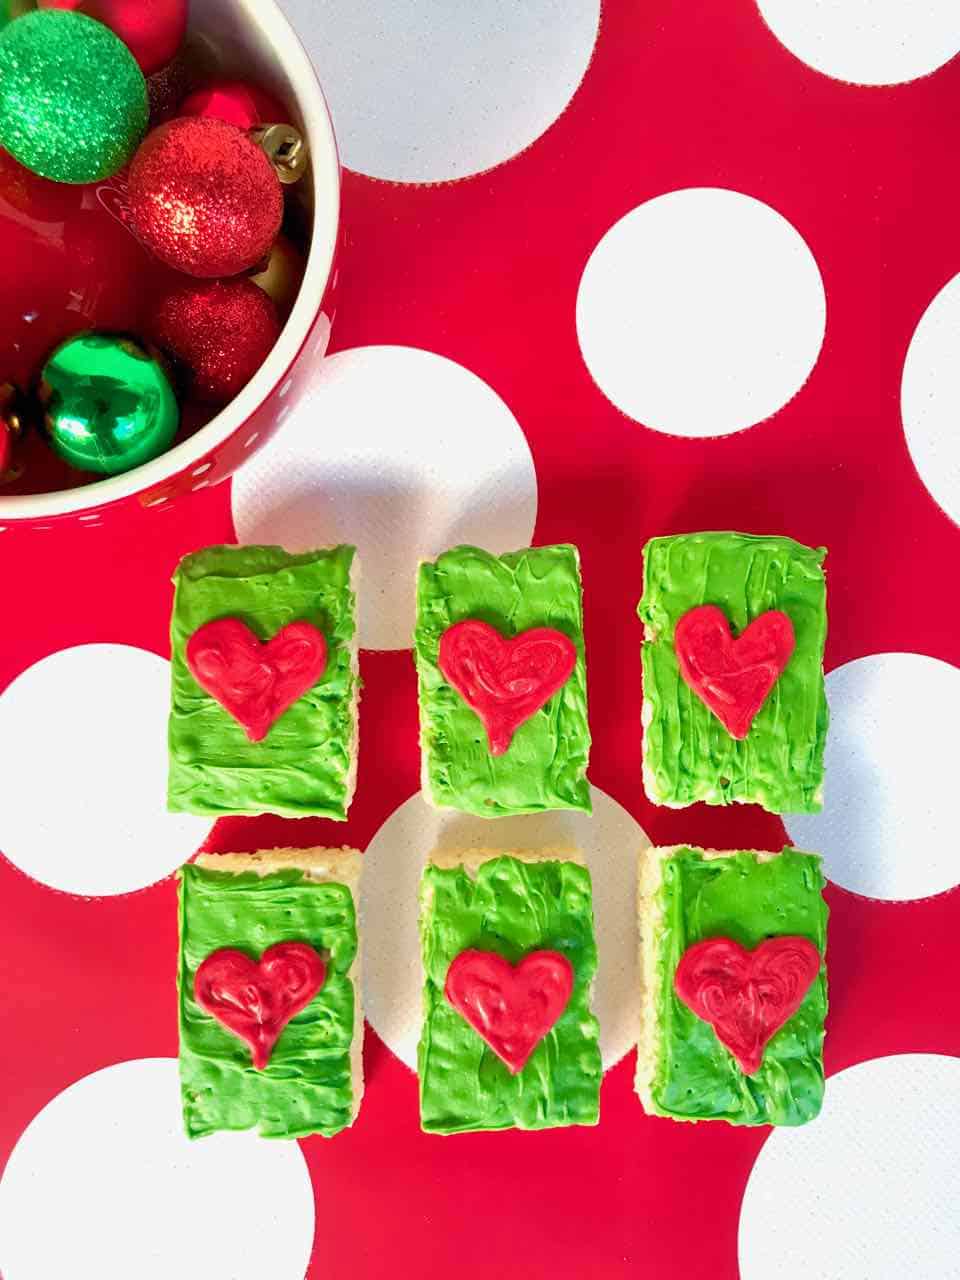 Would you like to make the perfect treat to eat while watching a favorite Christmas movie The Grinch? Make these quick and easy Grinch Treats! 